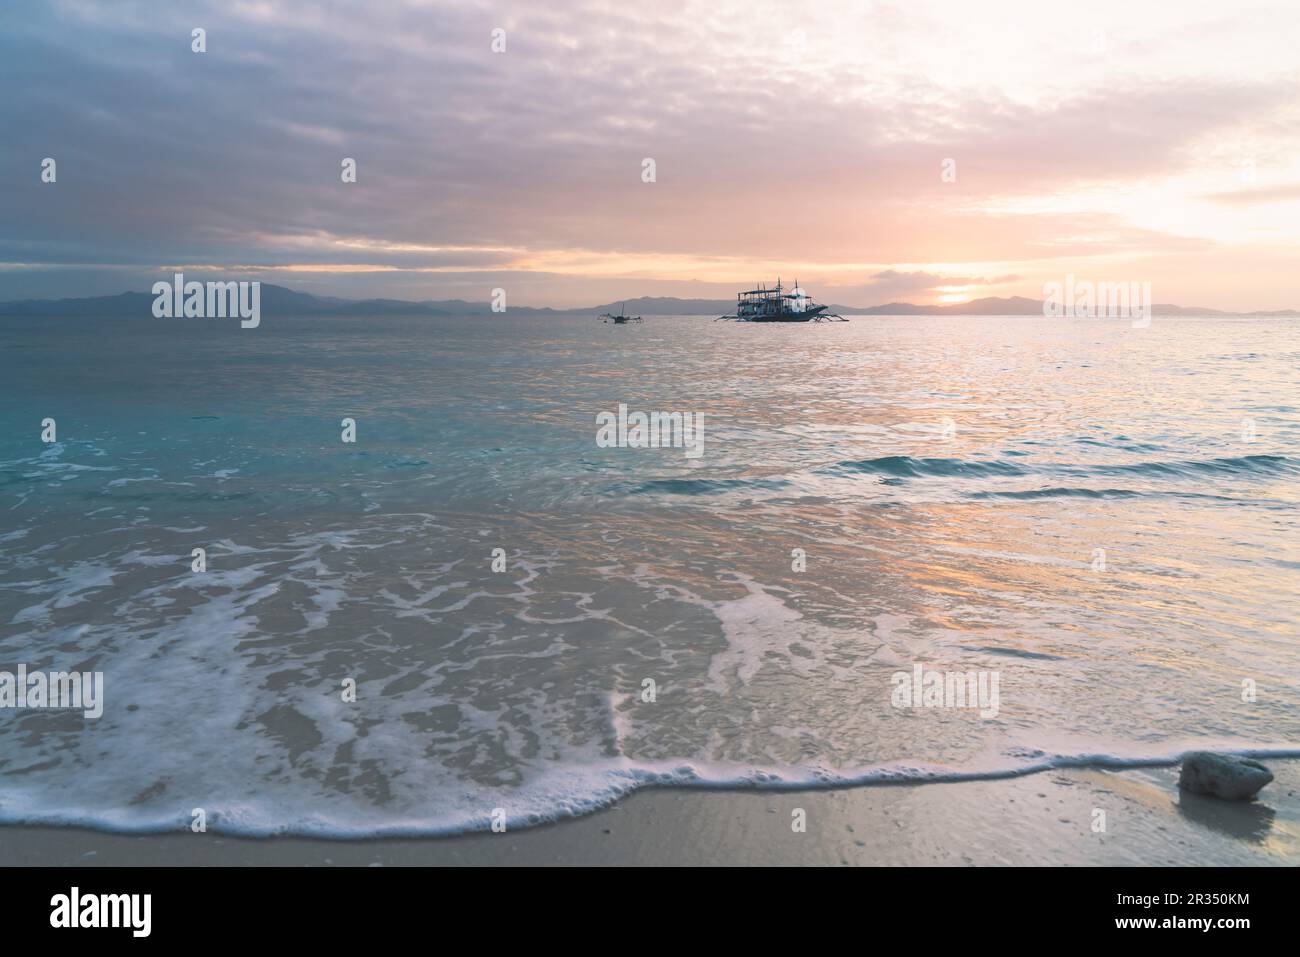 Scenic orange colored sunset on the beach with turquoise ocean surf and traditional boat on the horizon, Palawan, Philippines Stock Photo